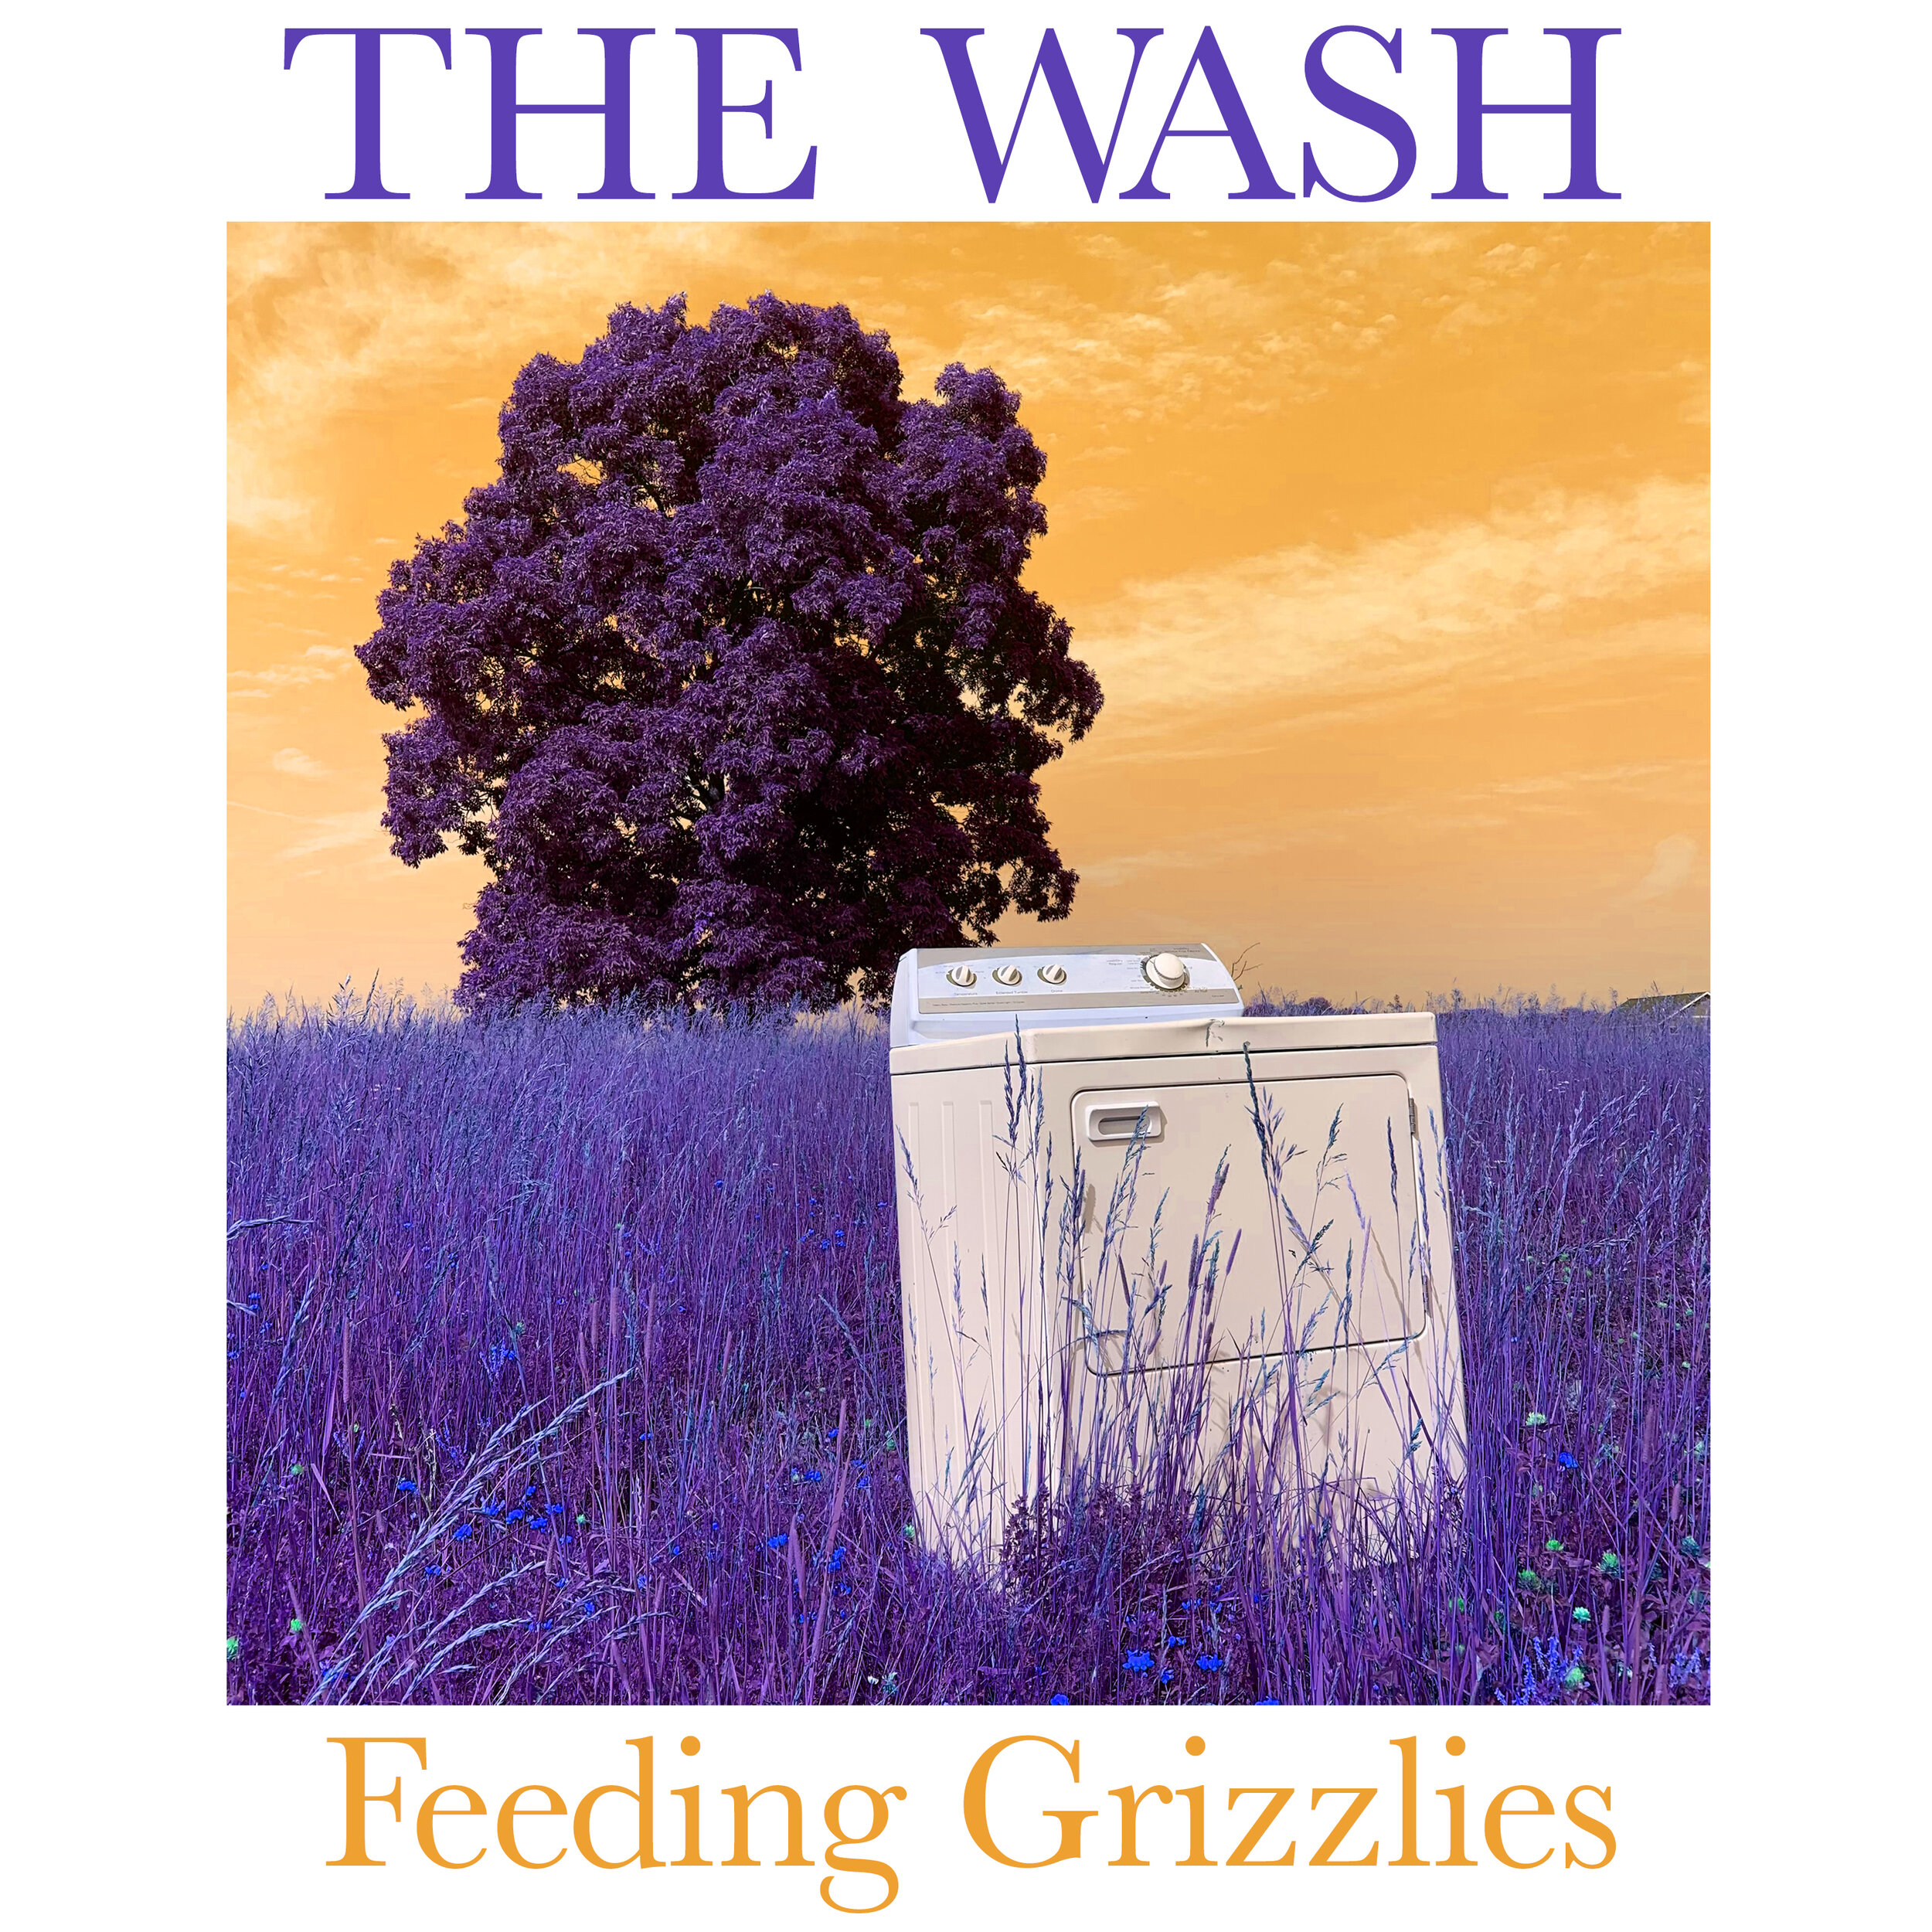 $10 - "The Wash" CD